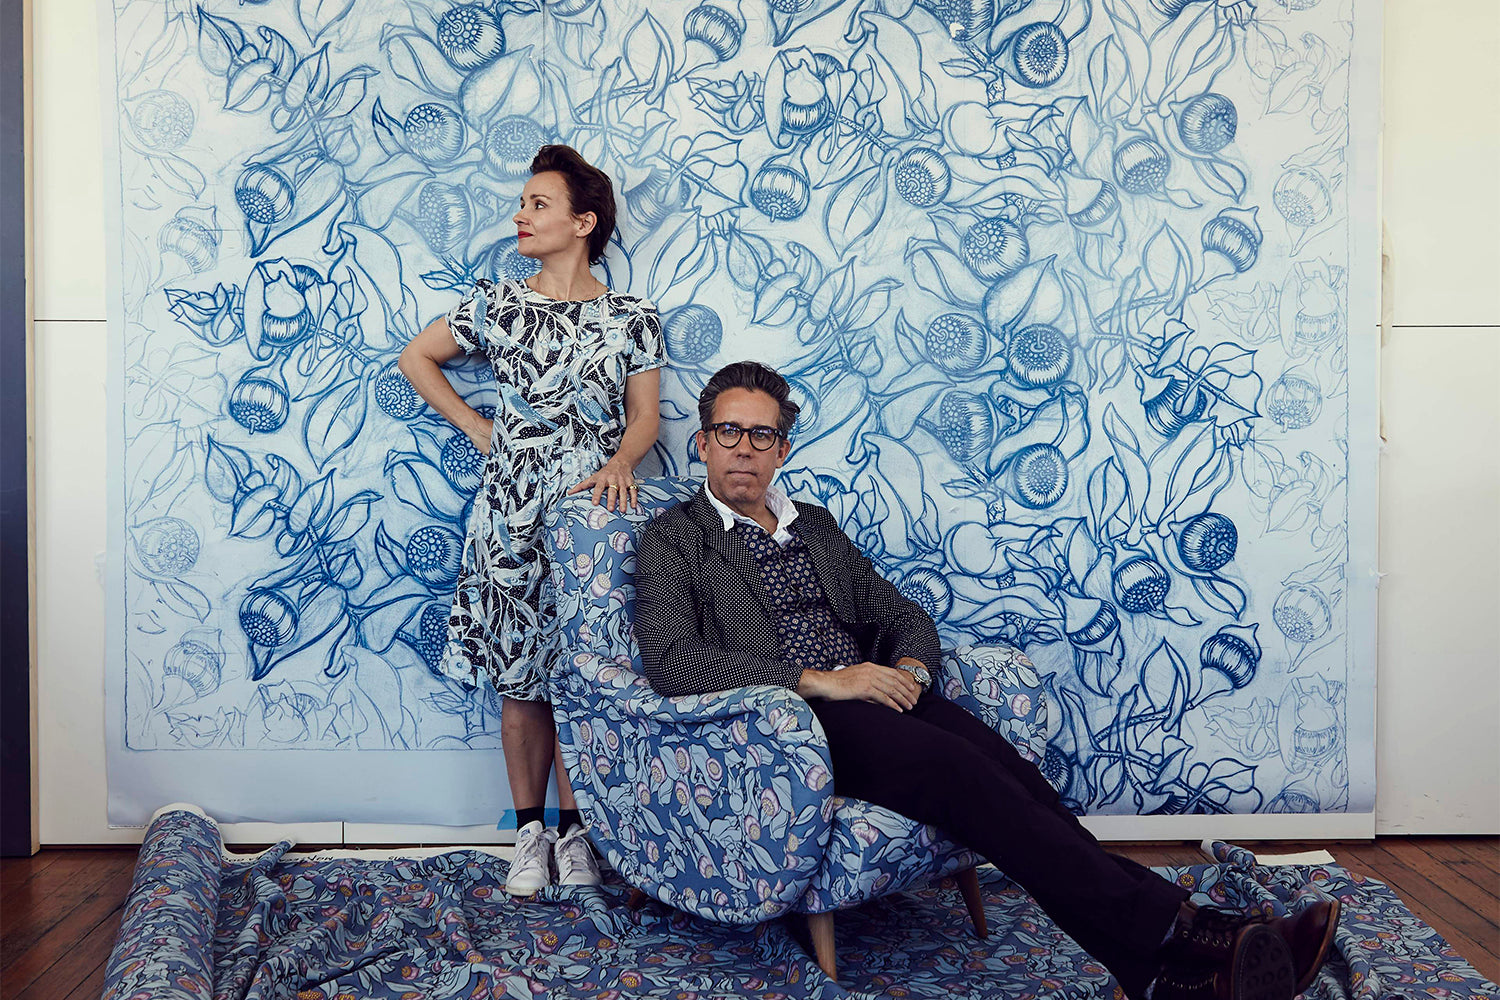 Portrait of a couple in front of a floral backdrop: a man sitting on a patterned chair with his legs spread out, and a woman standing next to the chair.